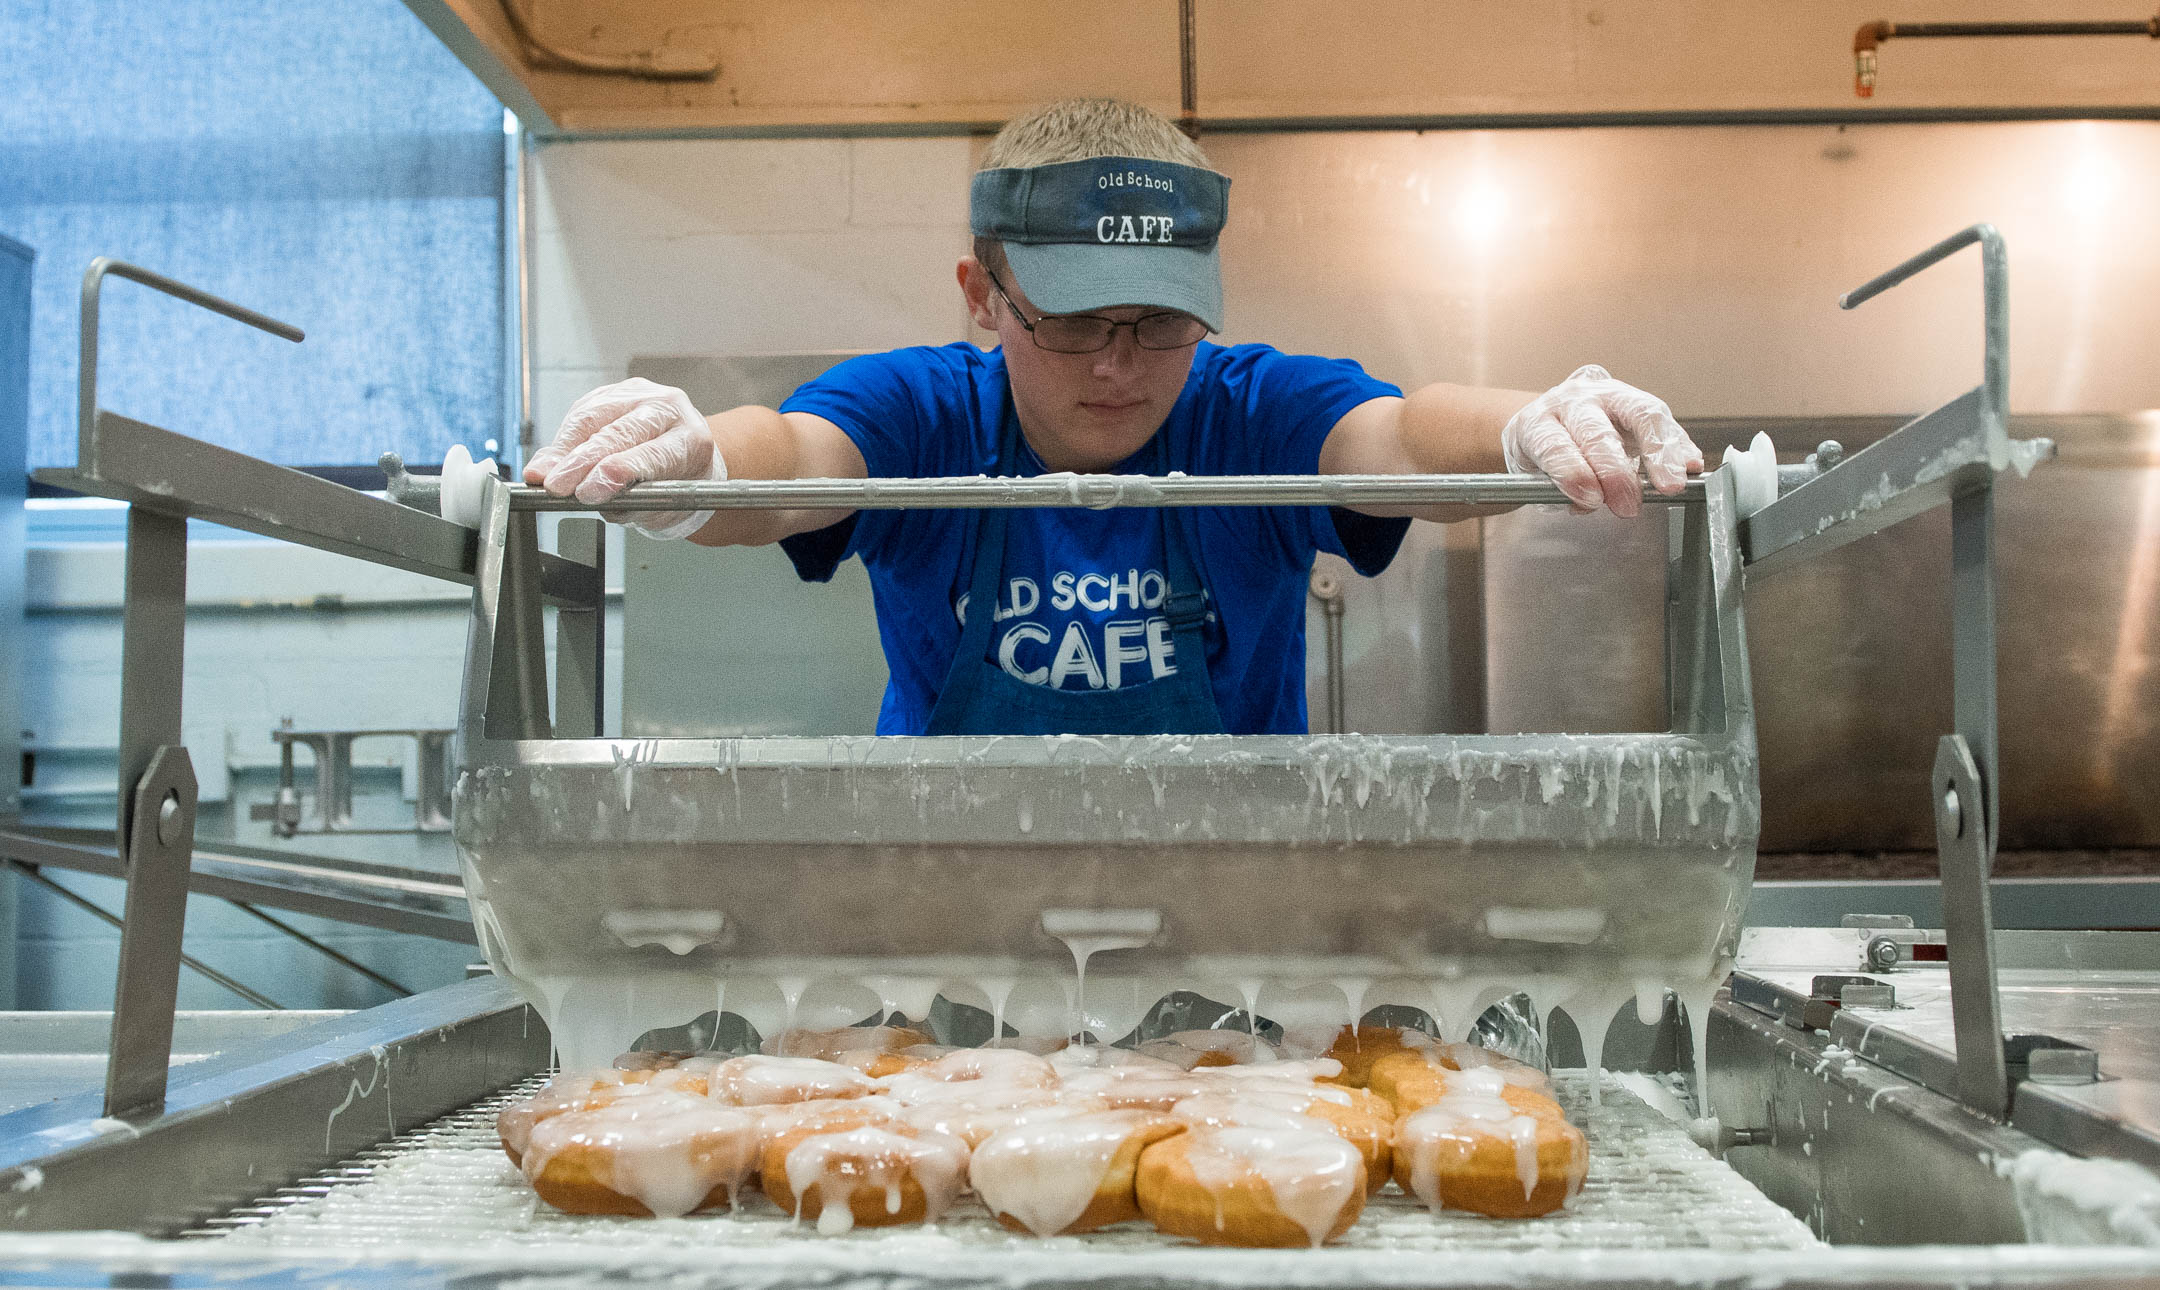 Metcalfe County High School student Taylor Brown glazes cinnamon roles while working at the Old School Cafe. Students can work one morning a week from 4 a.m. to 10 a.m. Photo by Bobby Ellis, May 24, 2017